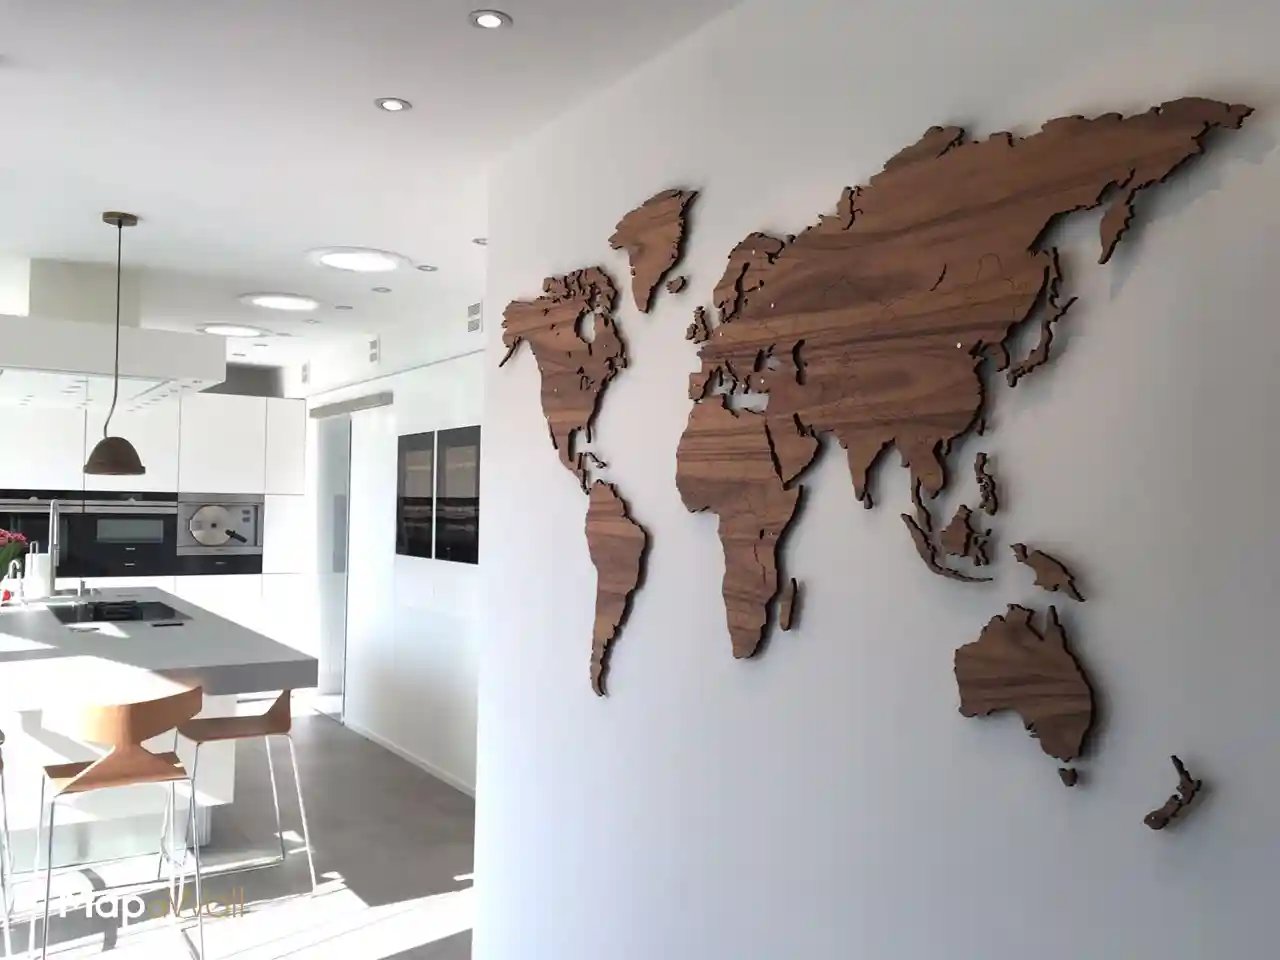 Our magnetic MapaWall Rosewood Santos world map with nickel plated pin-magnets installed in a modern and light kitchen